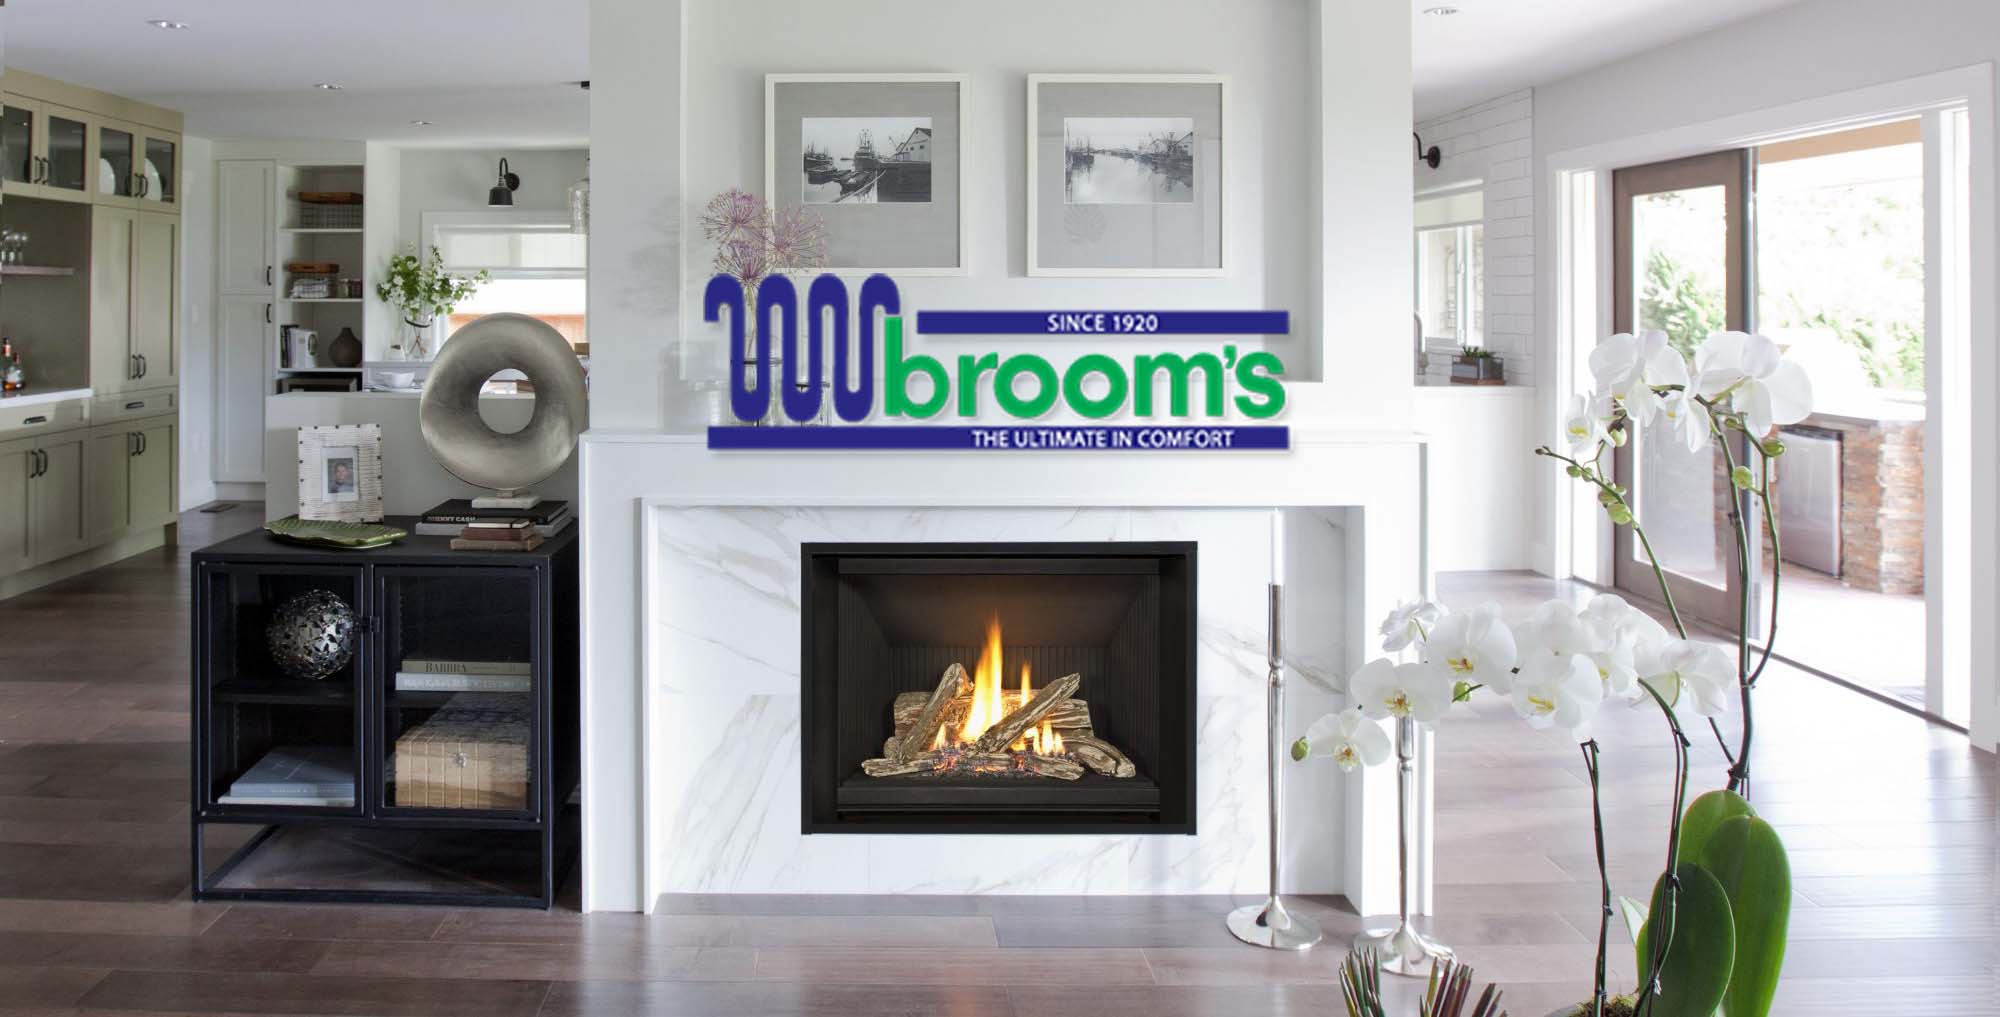 Broom's Heating, Air-Conditioning & Fireplaces